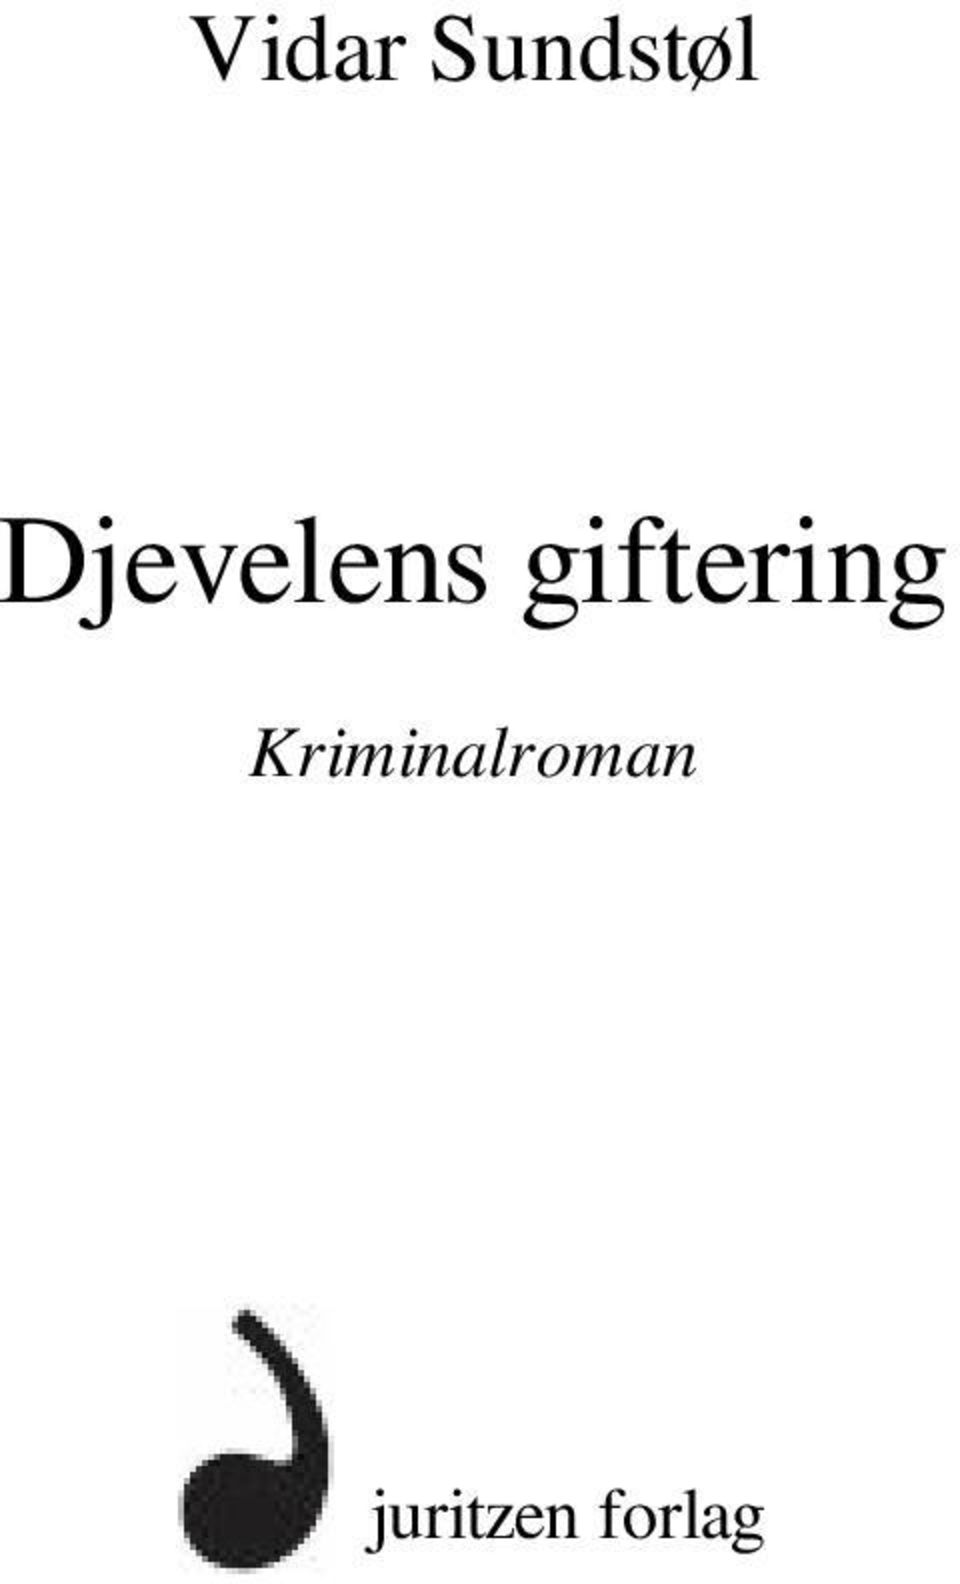 giftering